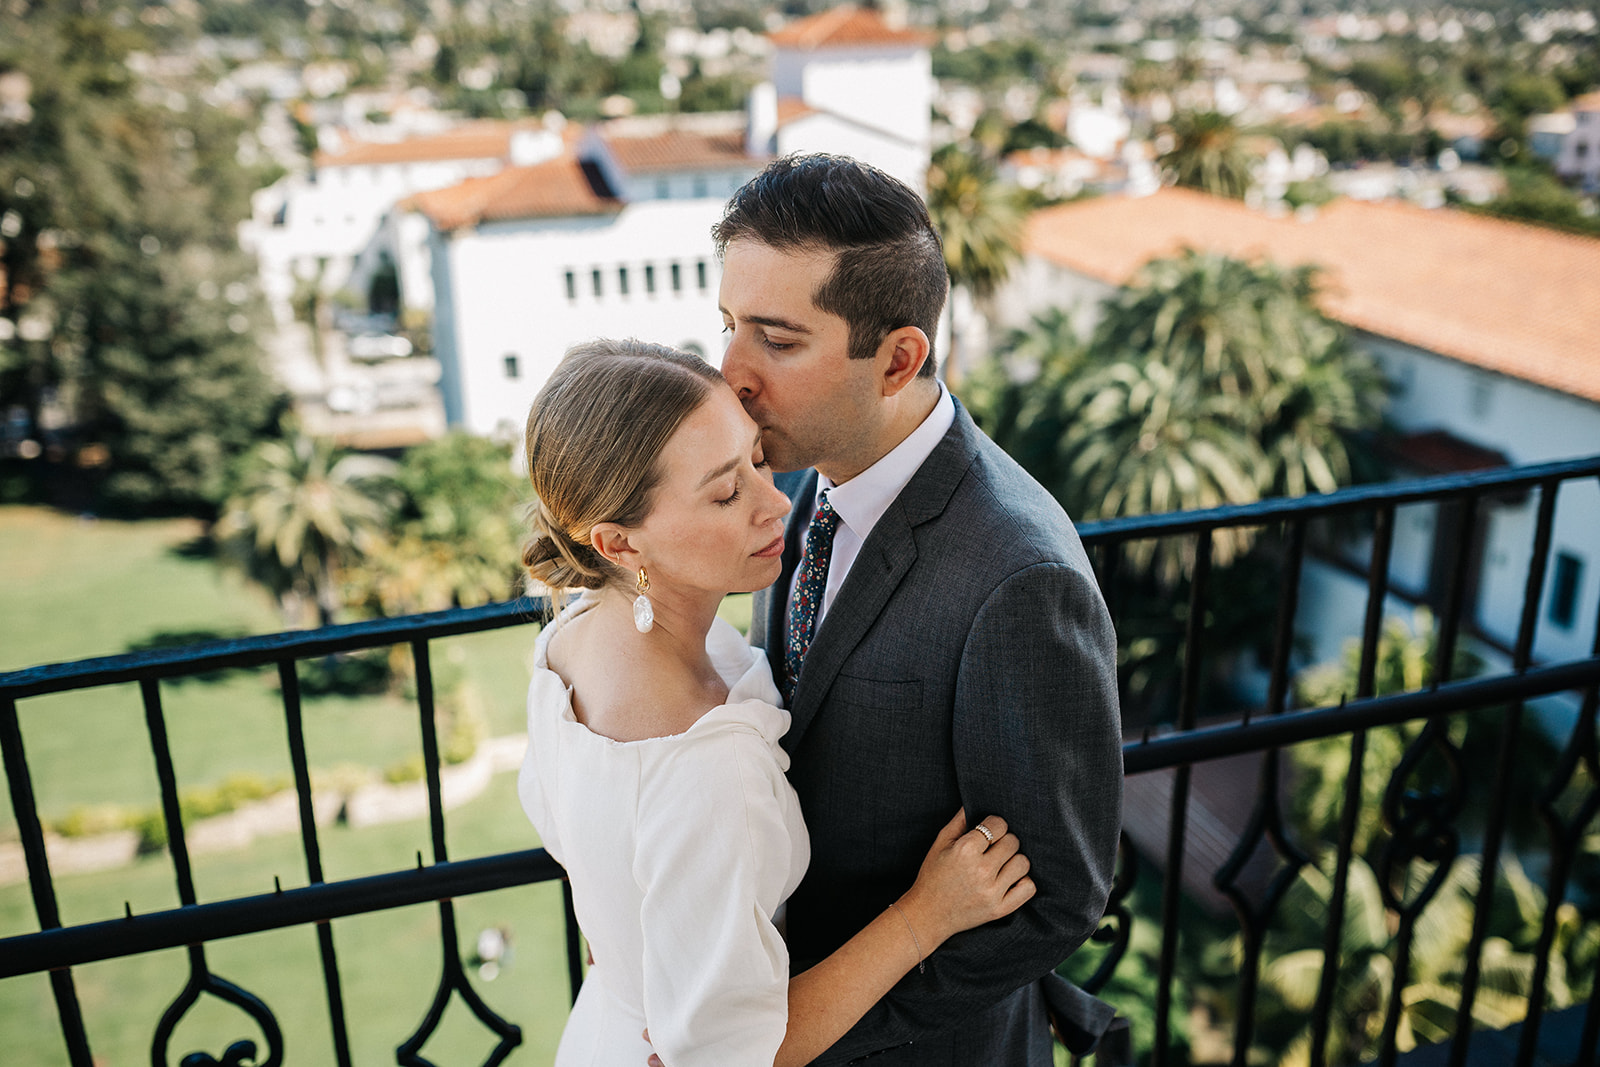 Bride and groom portrait Santa Barbara Courthouse  bell tower